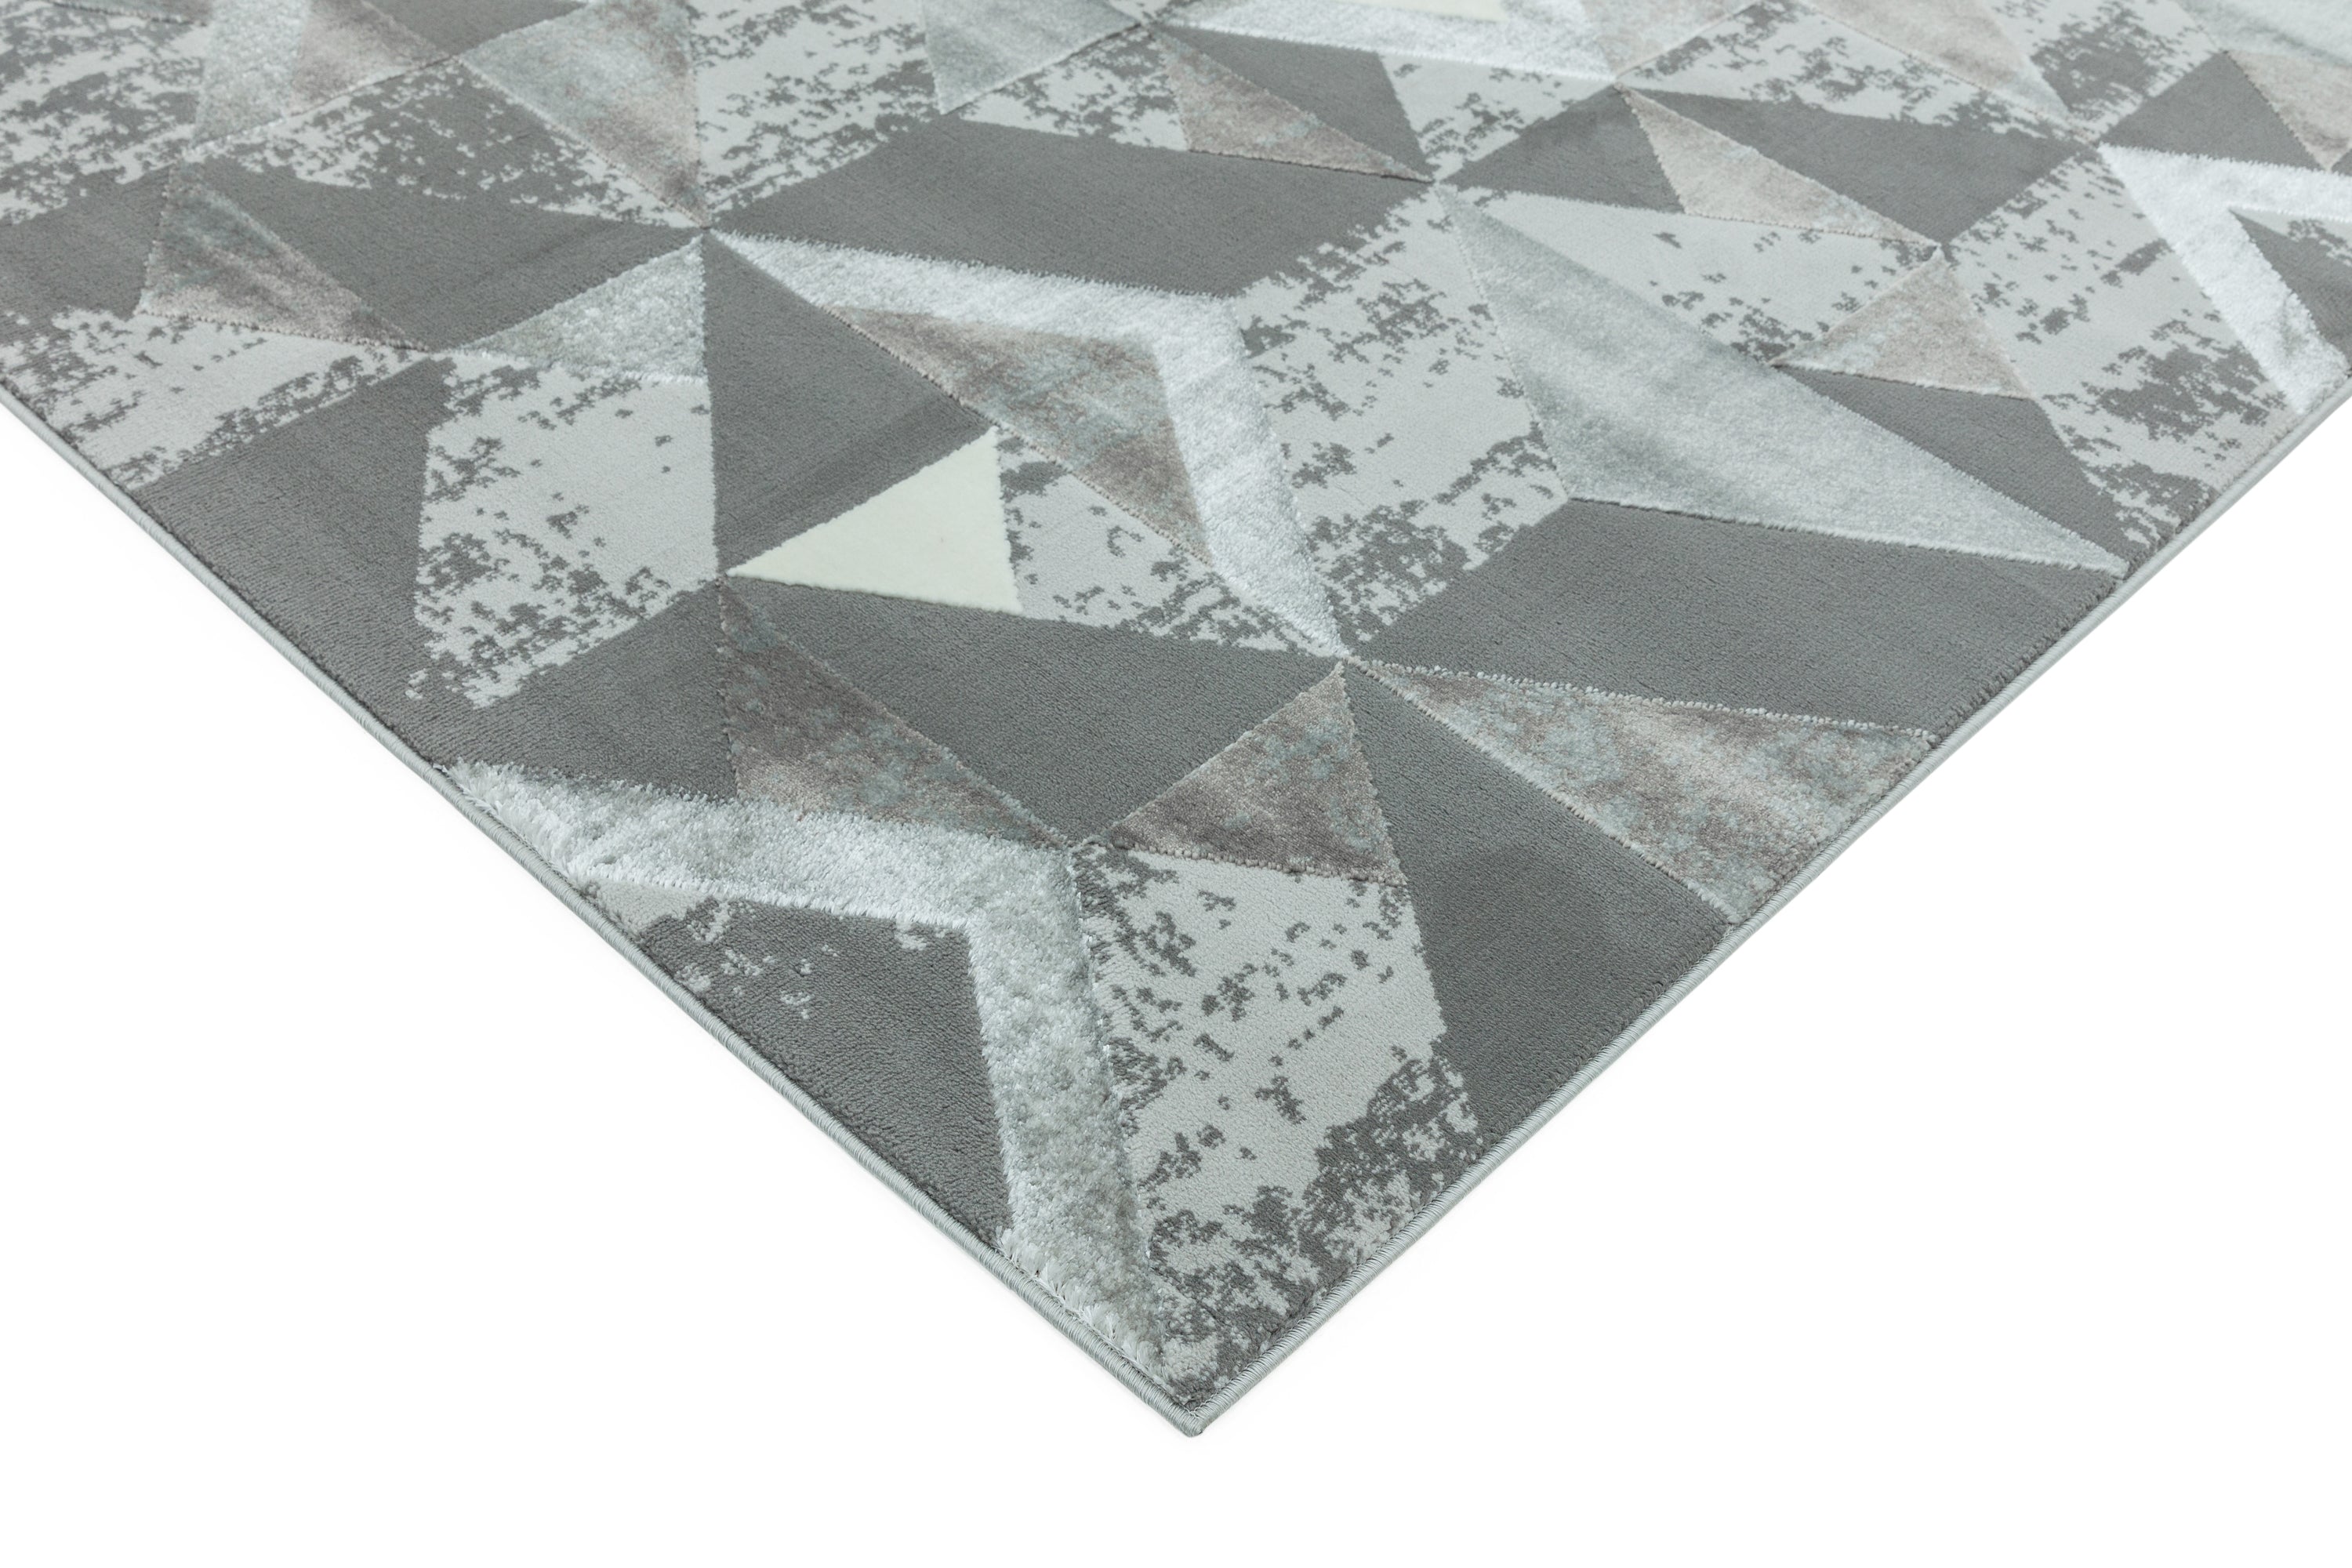 Orion OR09 Flag Silver Rug